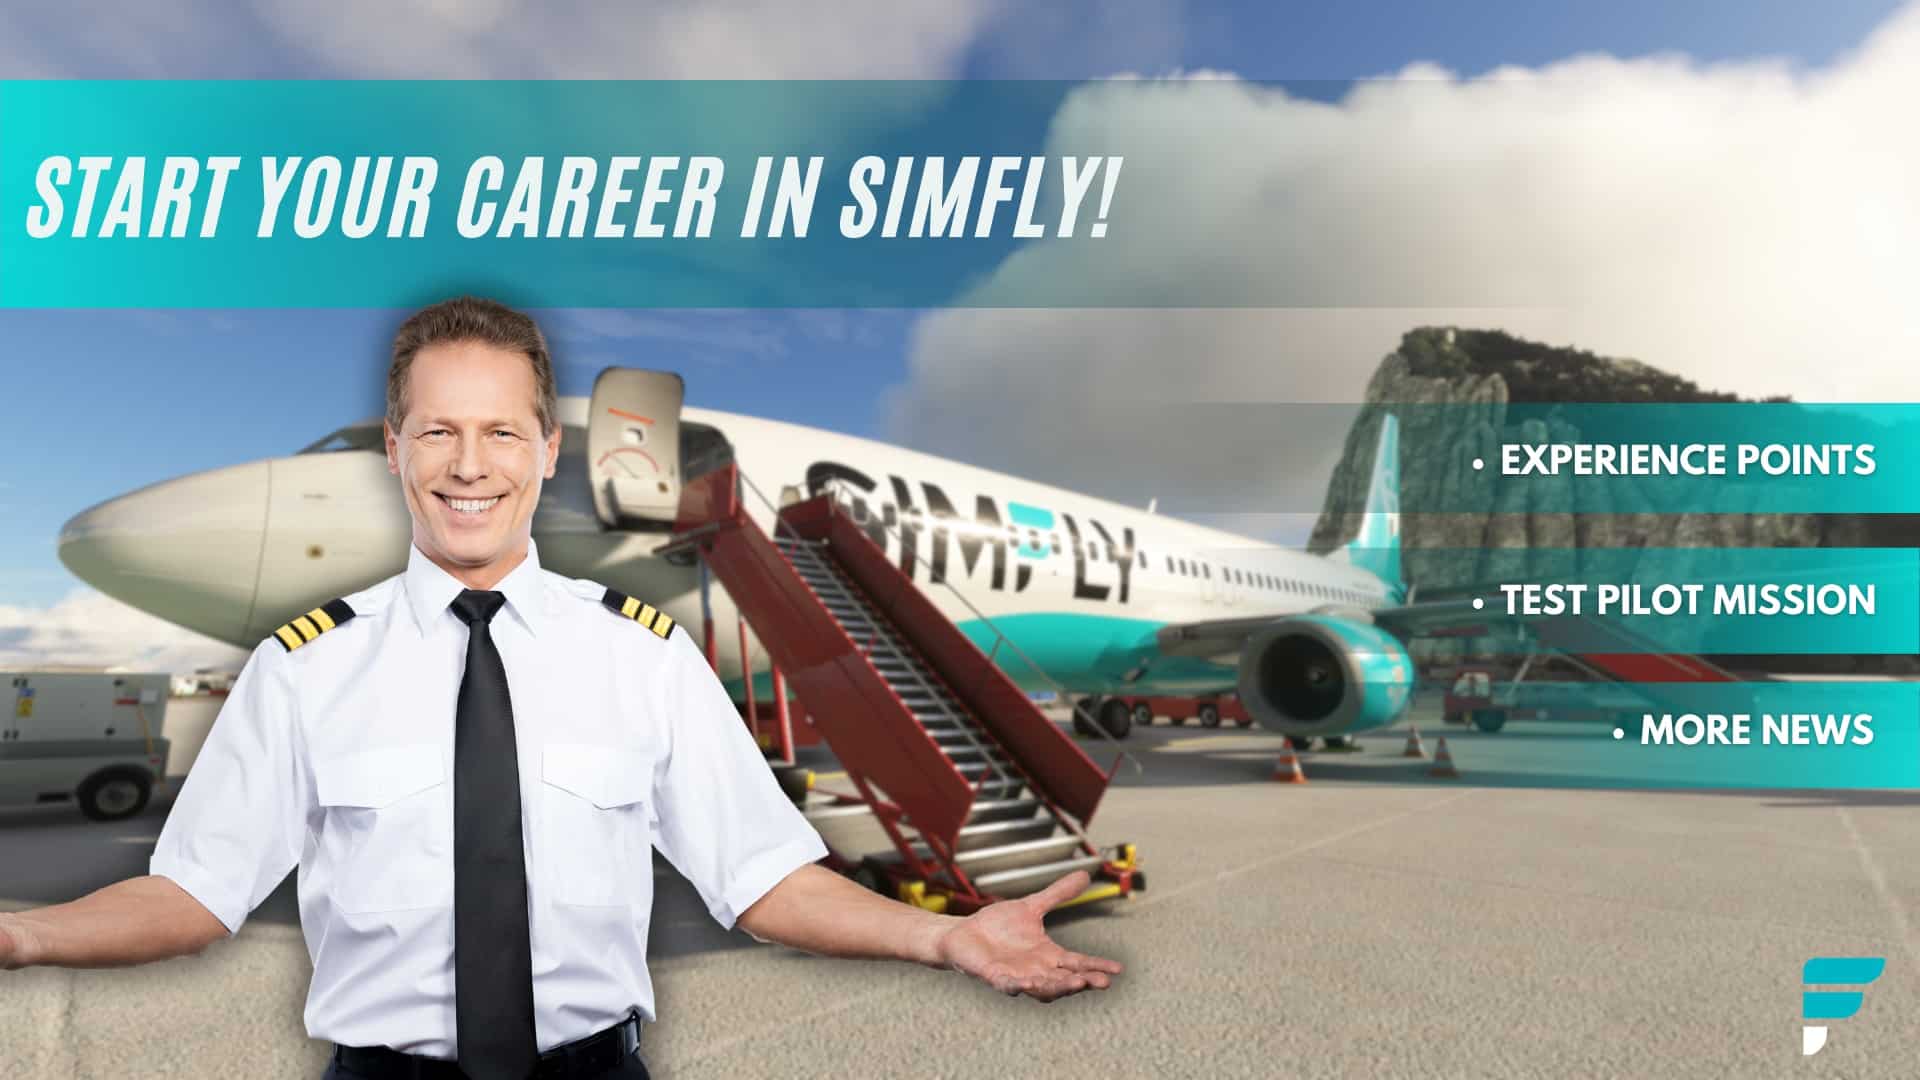 Start Your Career in SimFly Now!